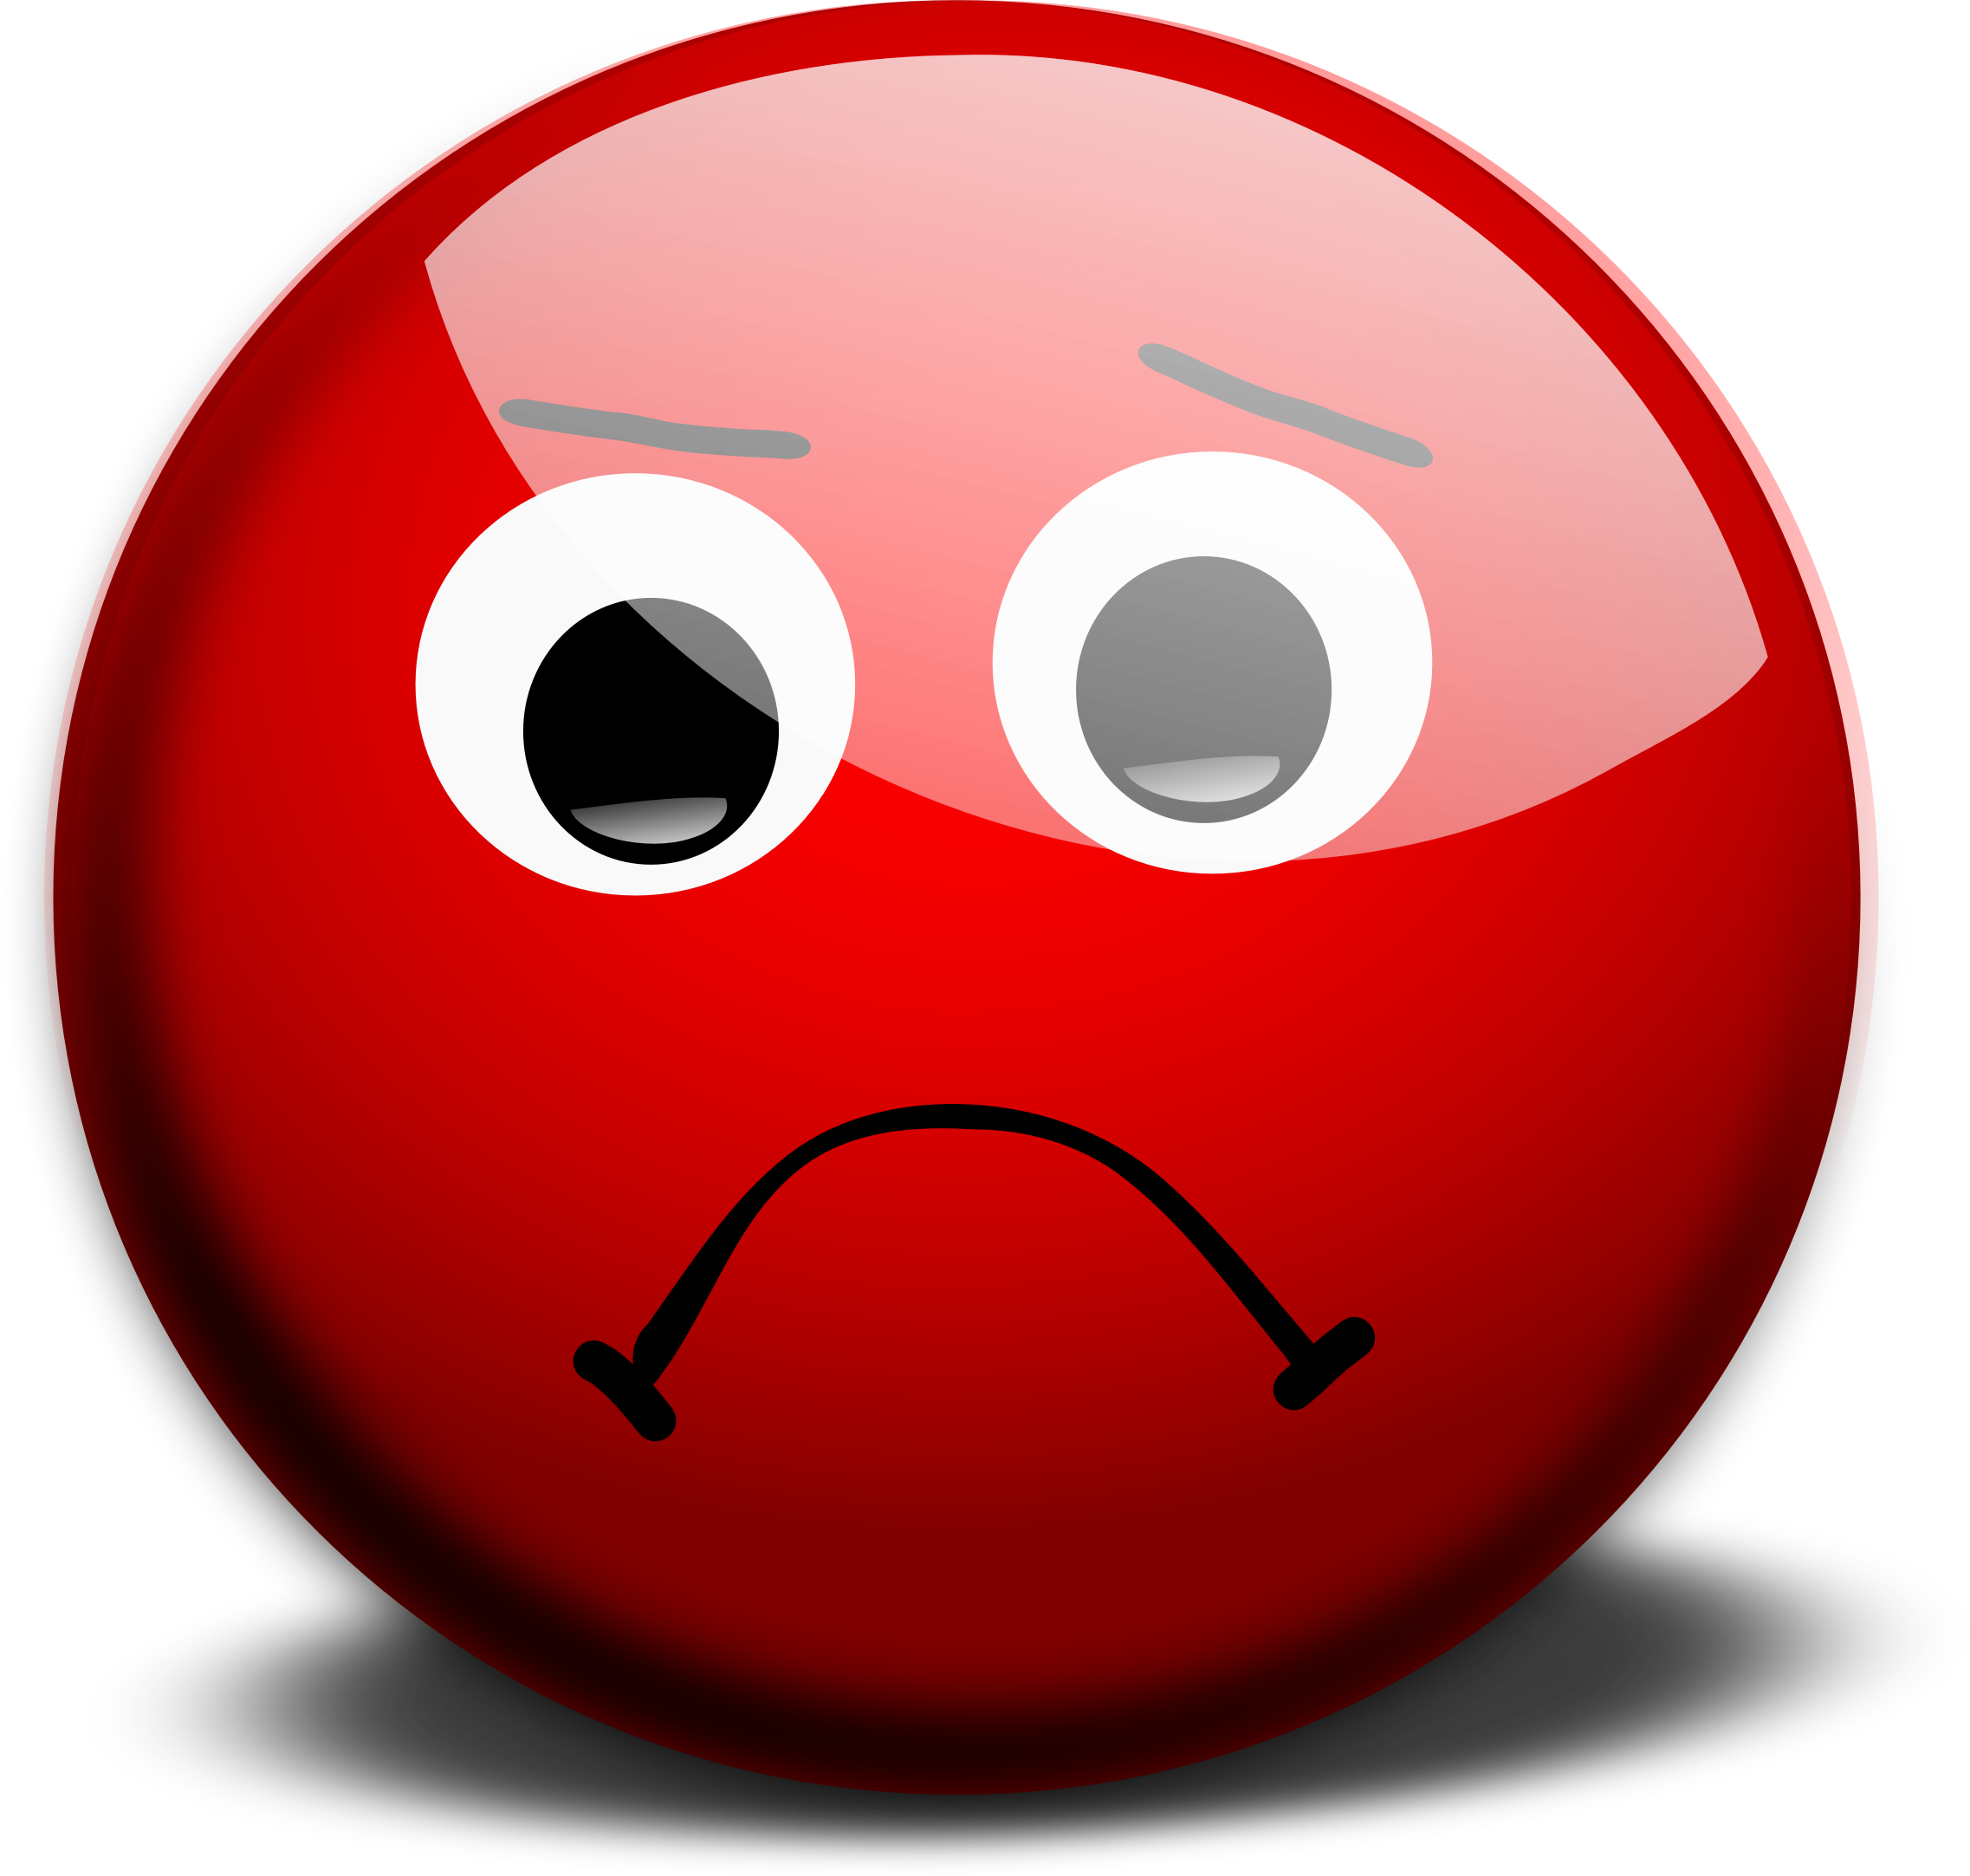 Sad face by morkaitehred - Red sad face representing a unsuccessful result of an action. Optimized for use on a web page.